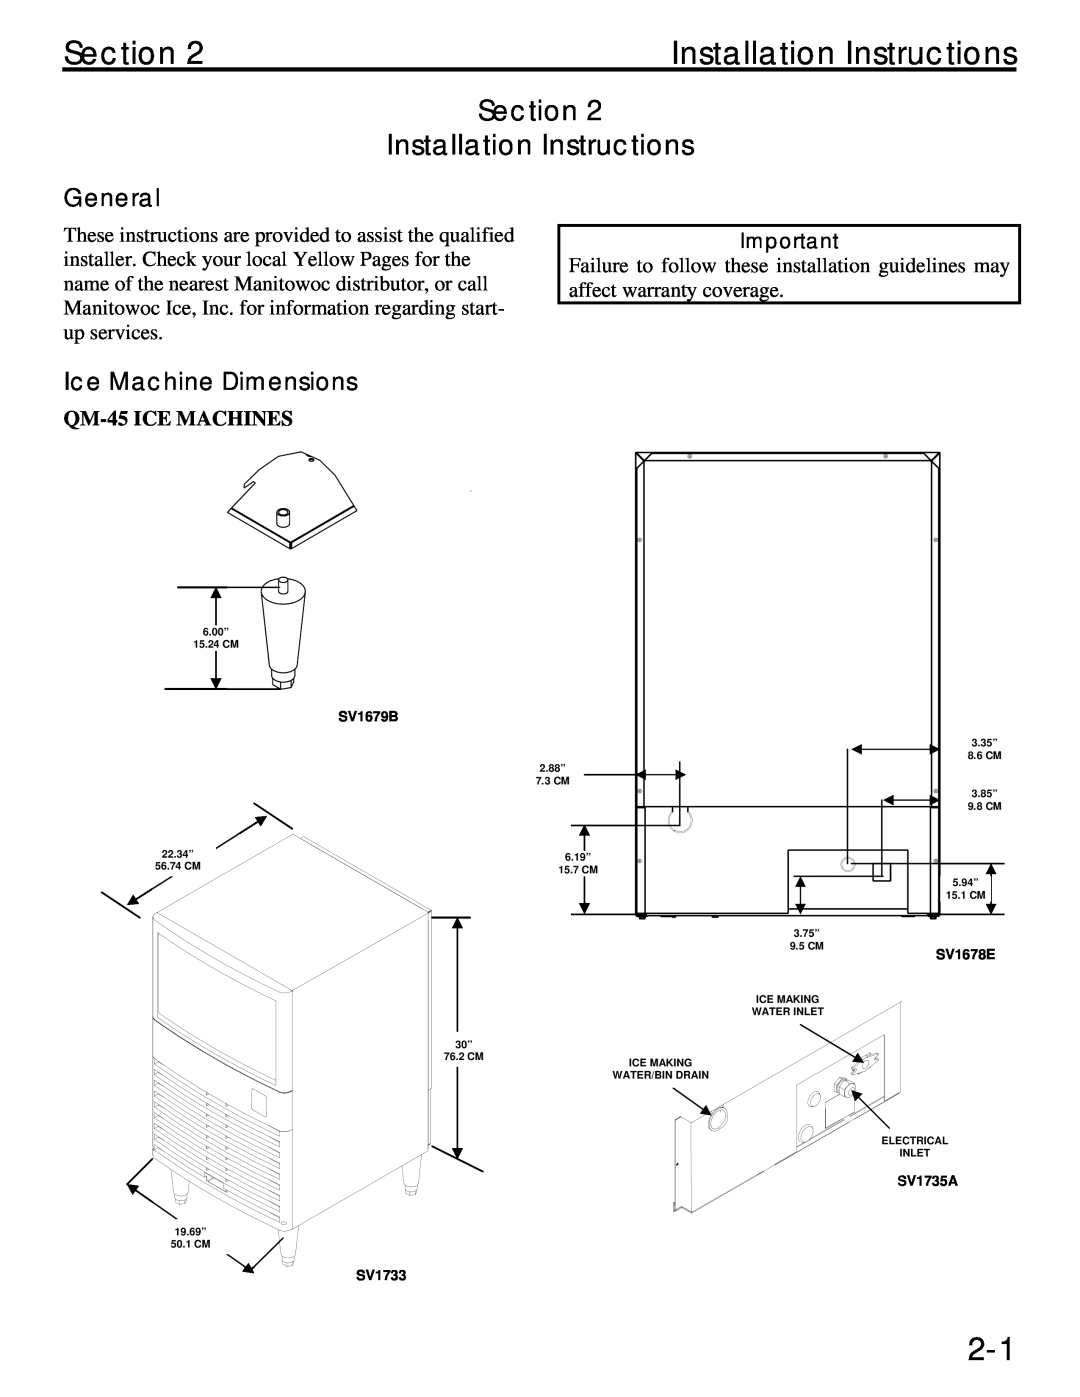 Manitowoc Ice QM45 Series Installation Instructions, Section, General, Ice Machine Dimensions, QM-45ICE MACHINES 